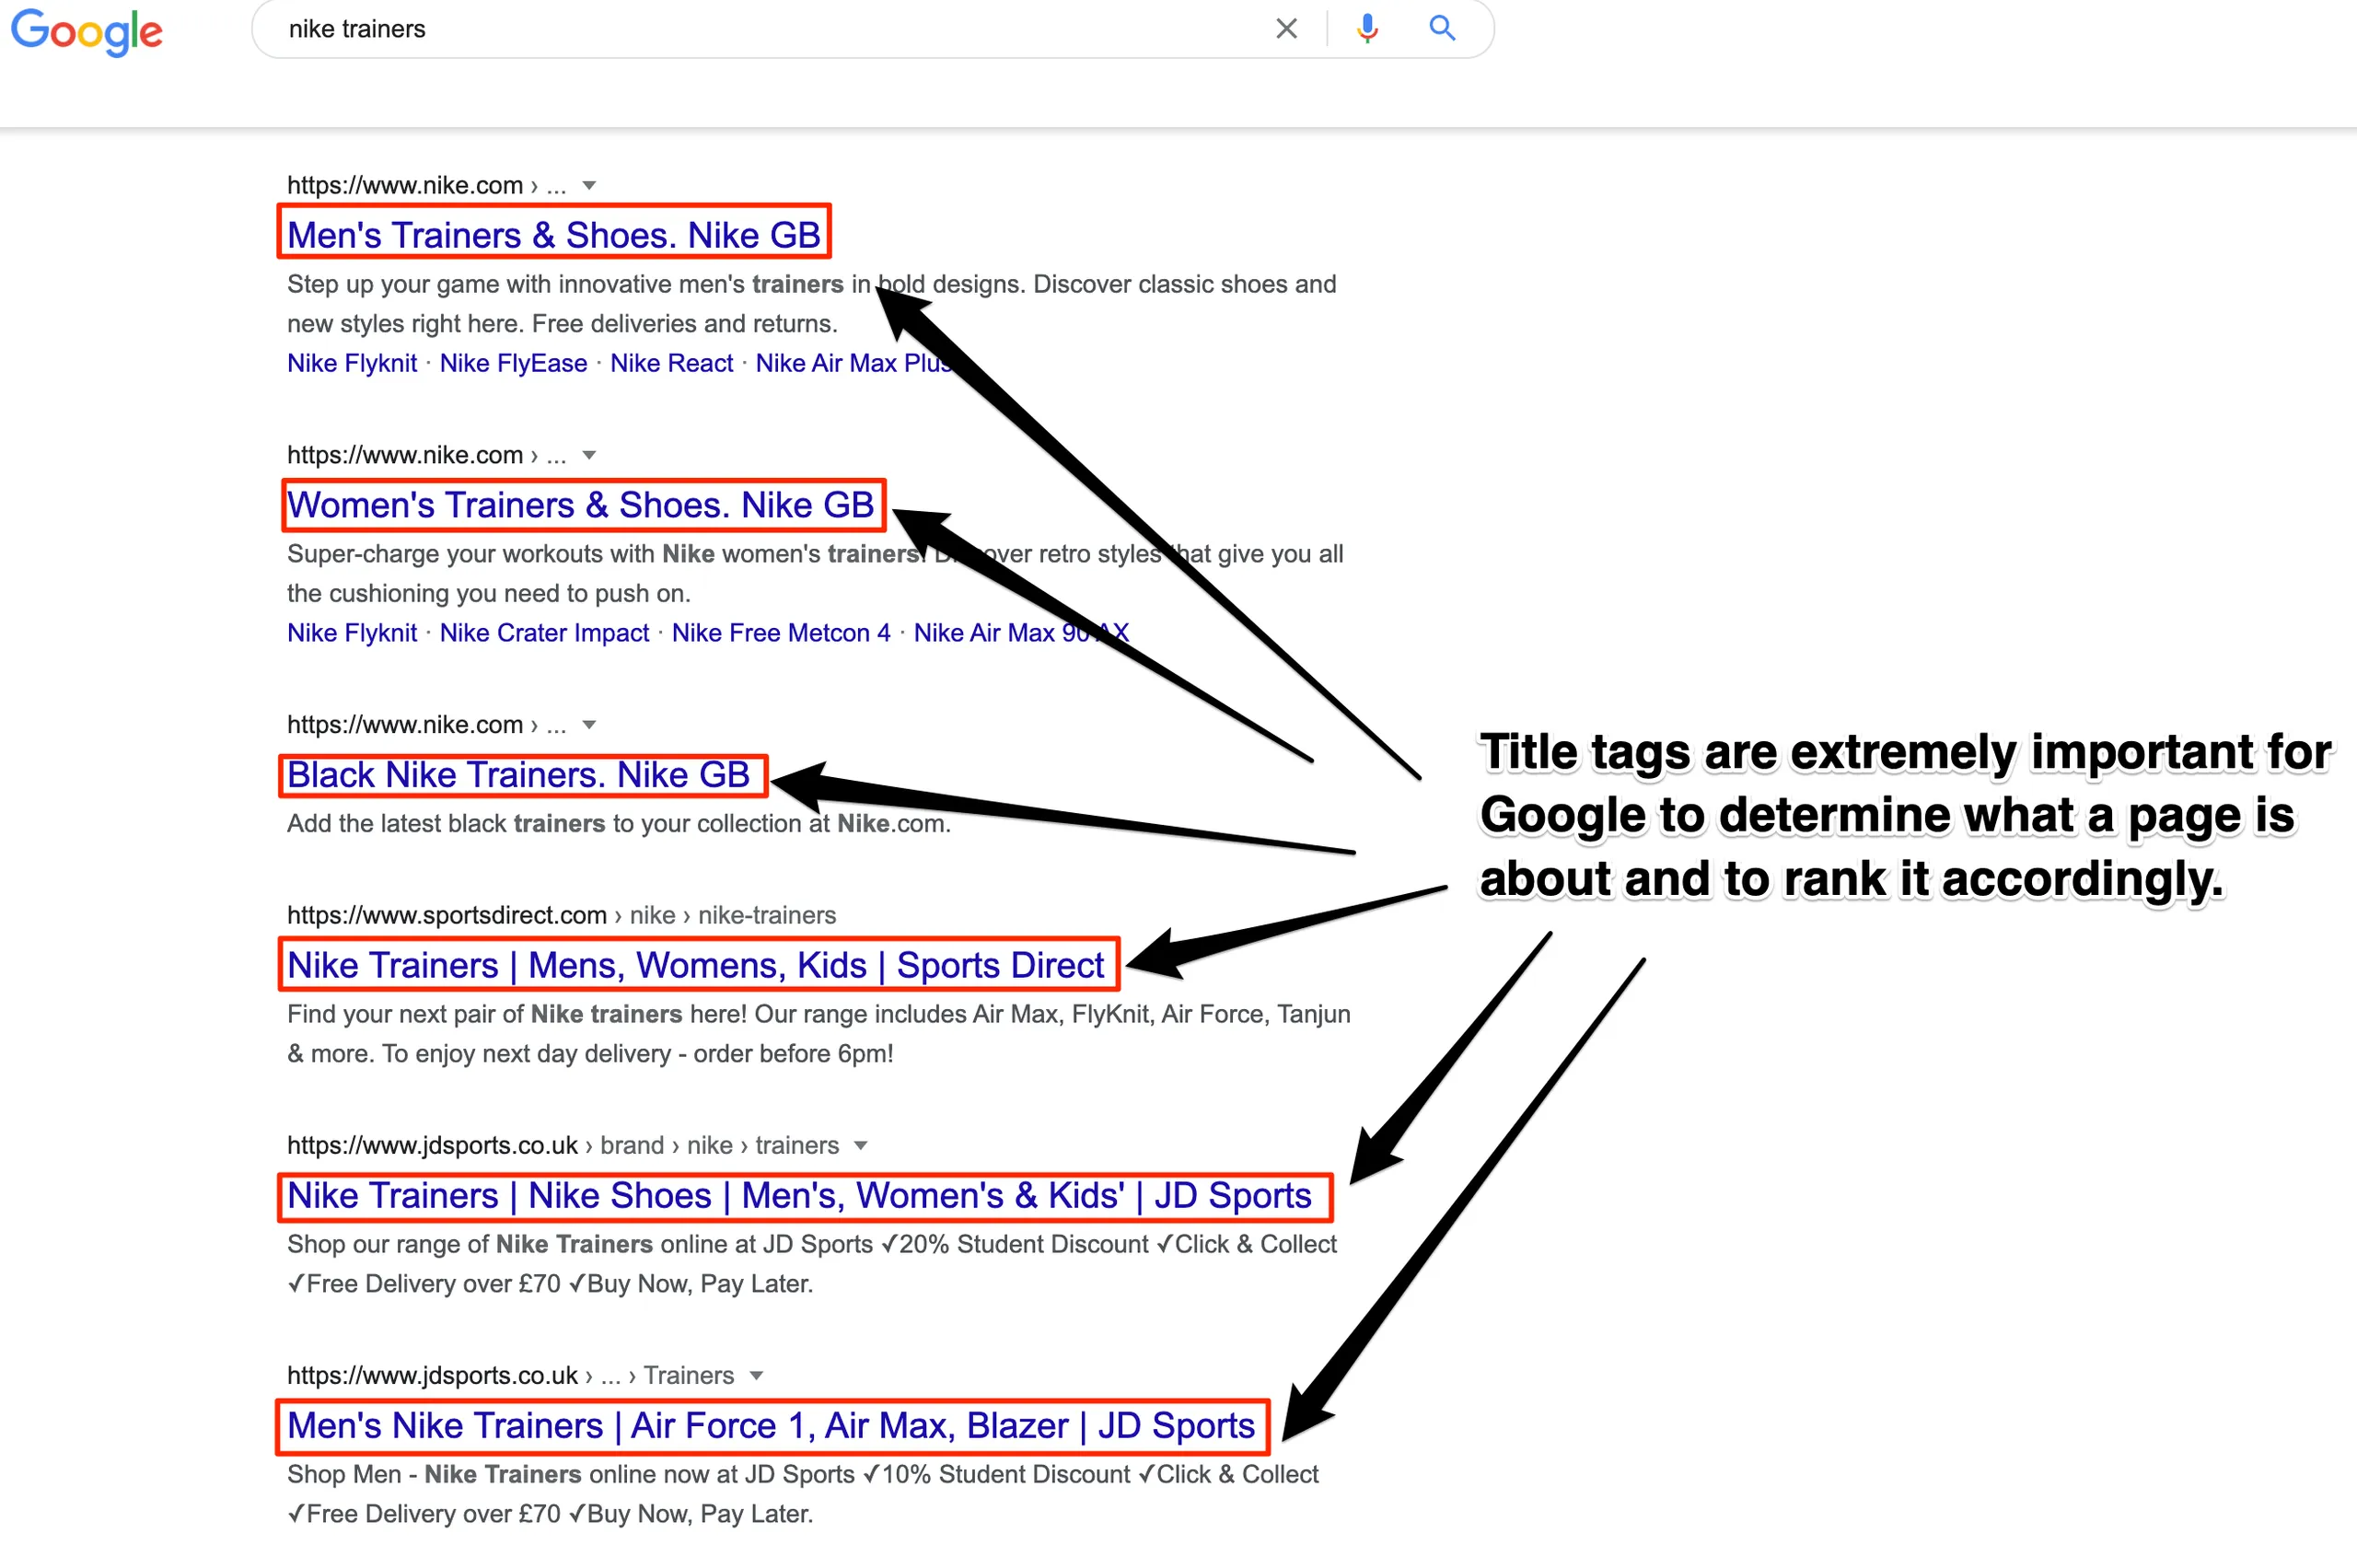 title tags in Google search